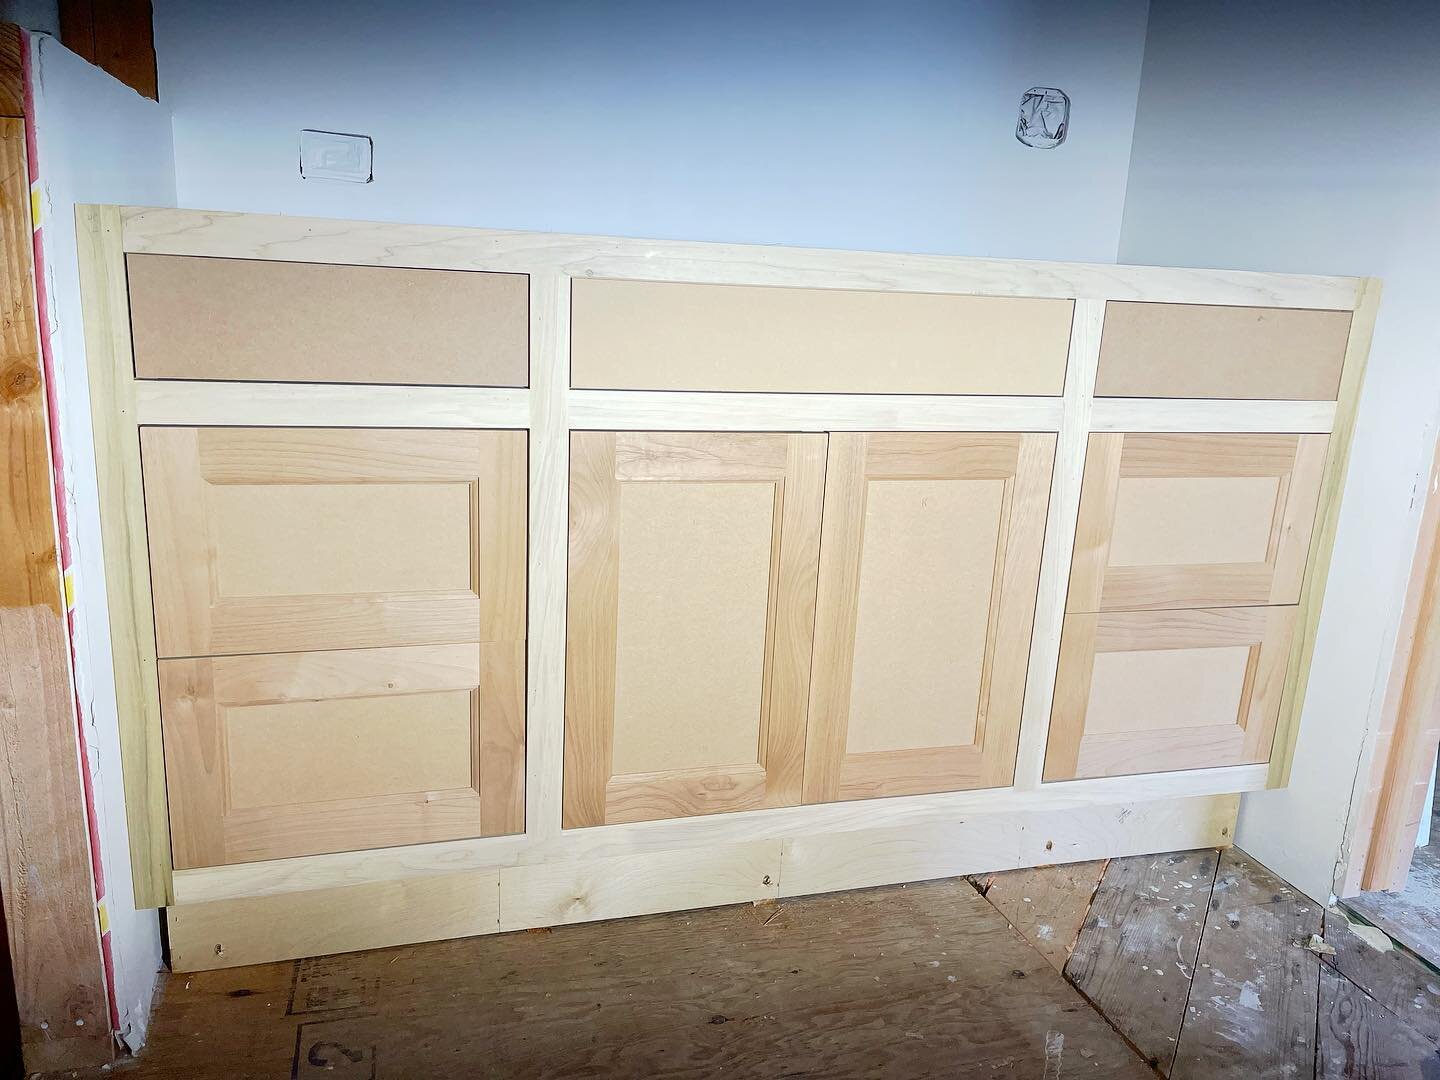 We are buzzing this Spring! Two vanities in, a whole house to go&hellip; #customcabinetry #customcarpentry #cabinetinstallation #santabarbara #valleywoodwork